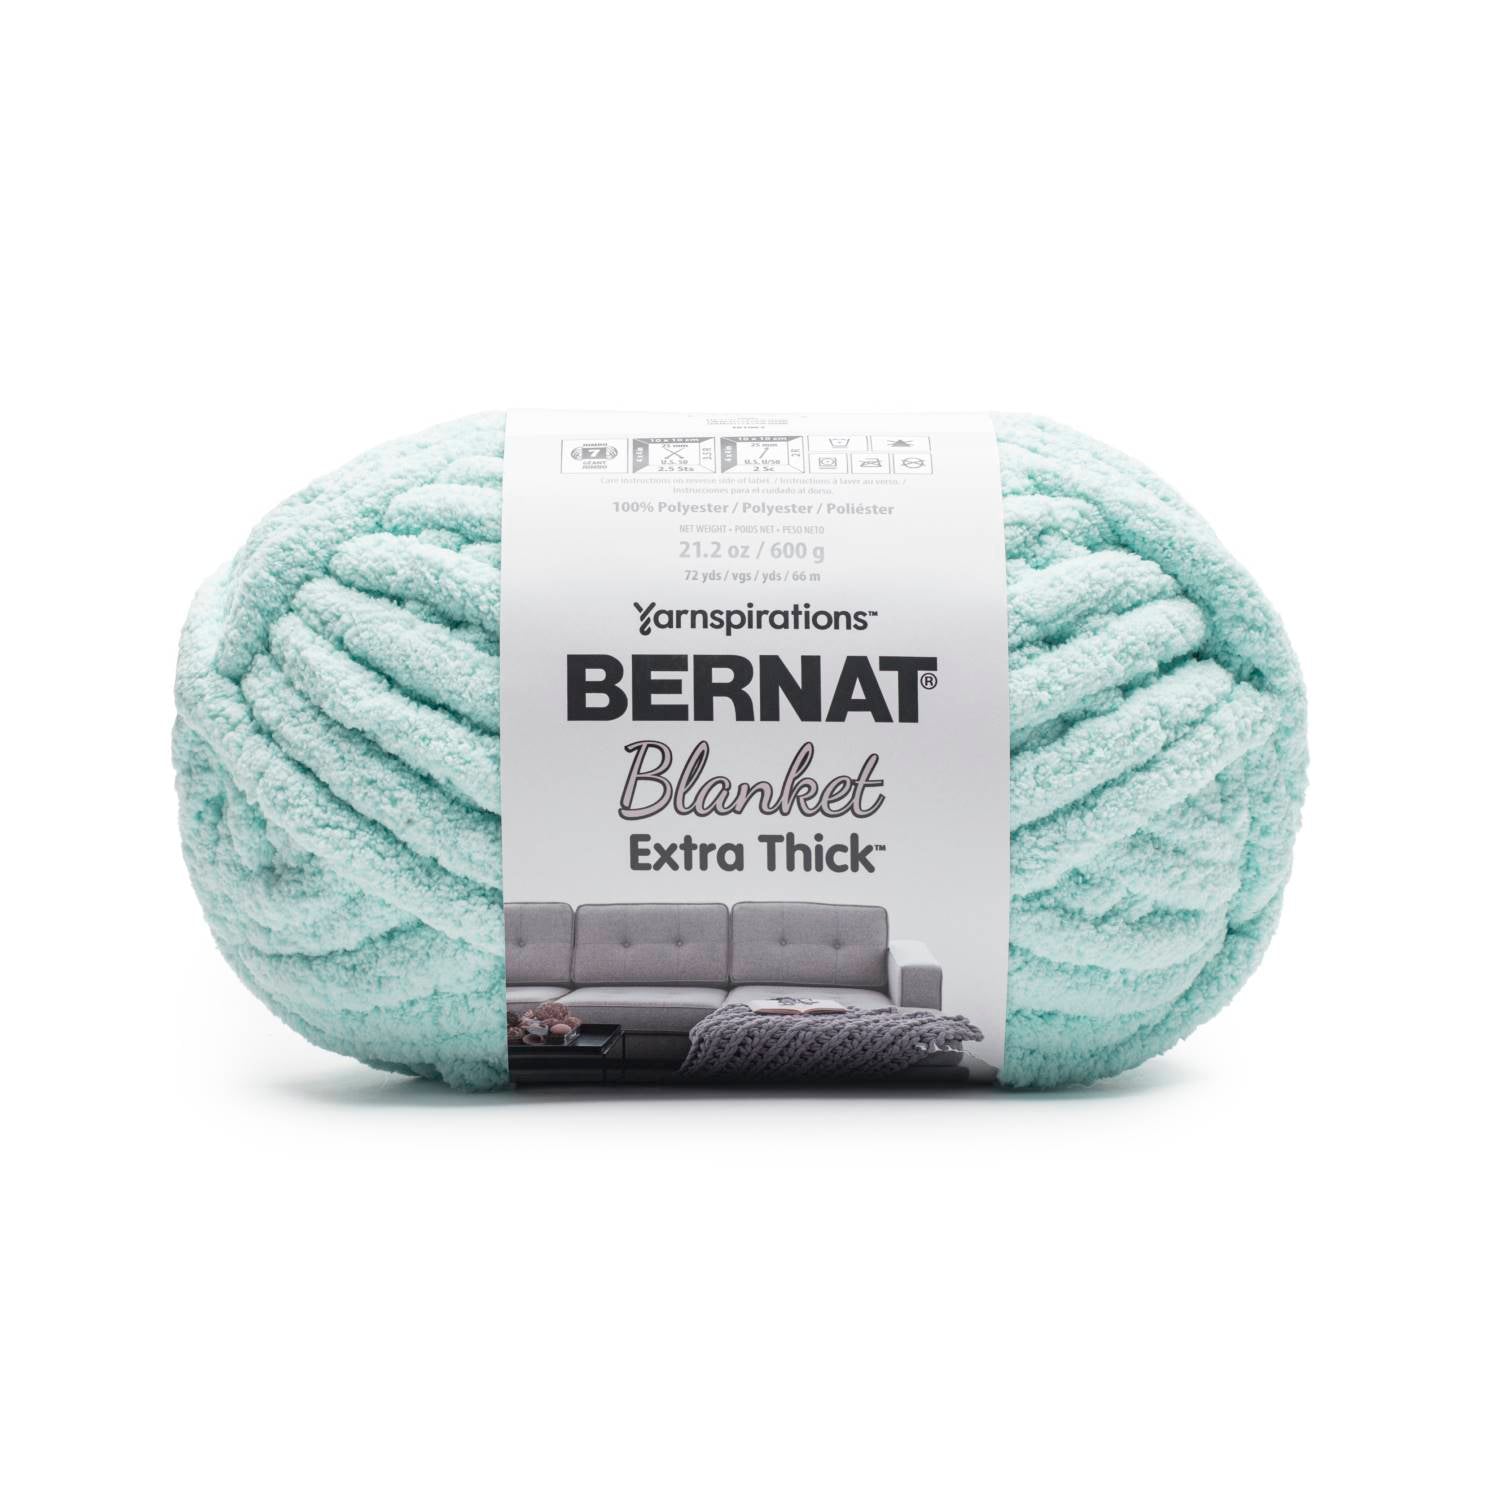 Bernat Blanket Extra Thick Yarn (600g/21.2oz) - Discontinued Shades Blue Frost